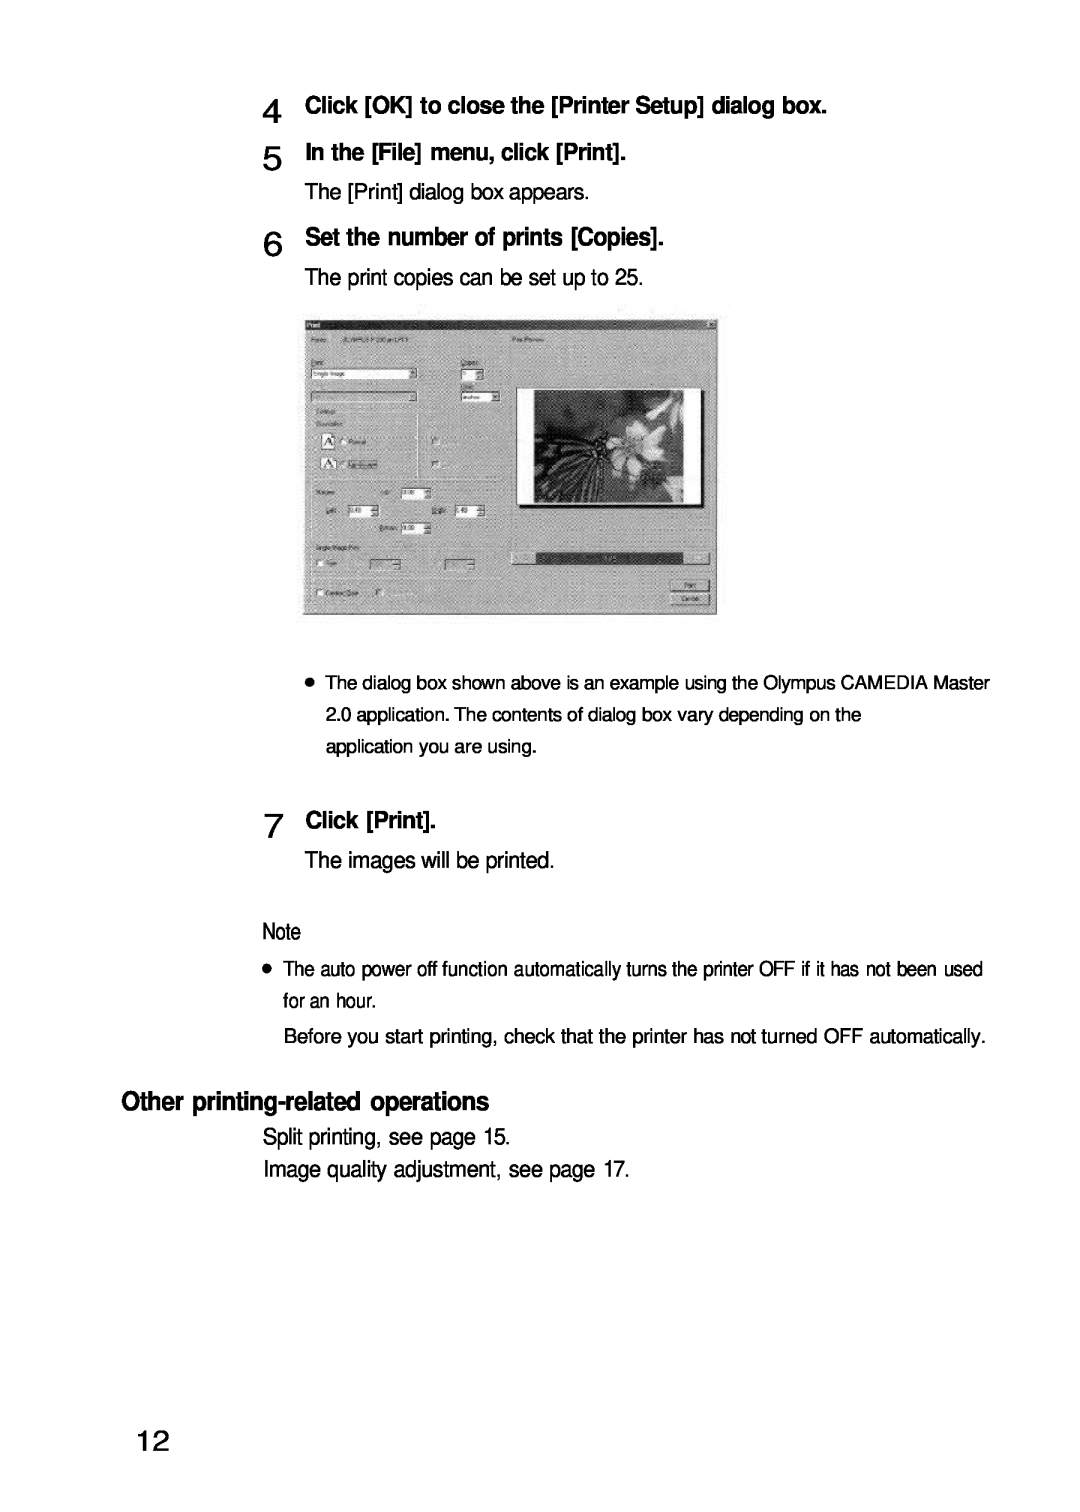 Olympus P-200 manual Other printing-related operations, Click OK to close the Printer Setup dialog box, Click Print 